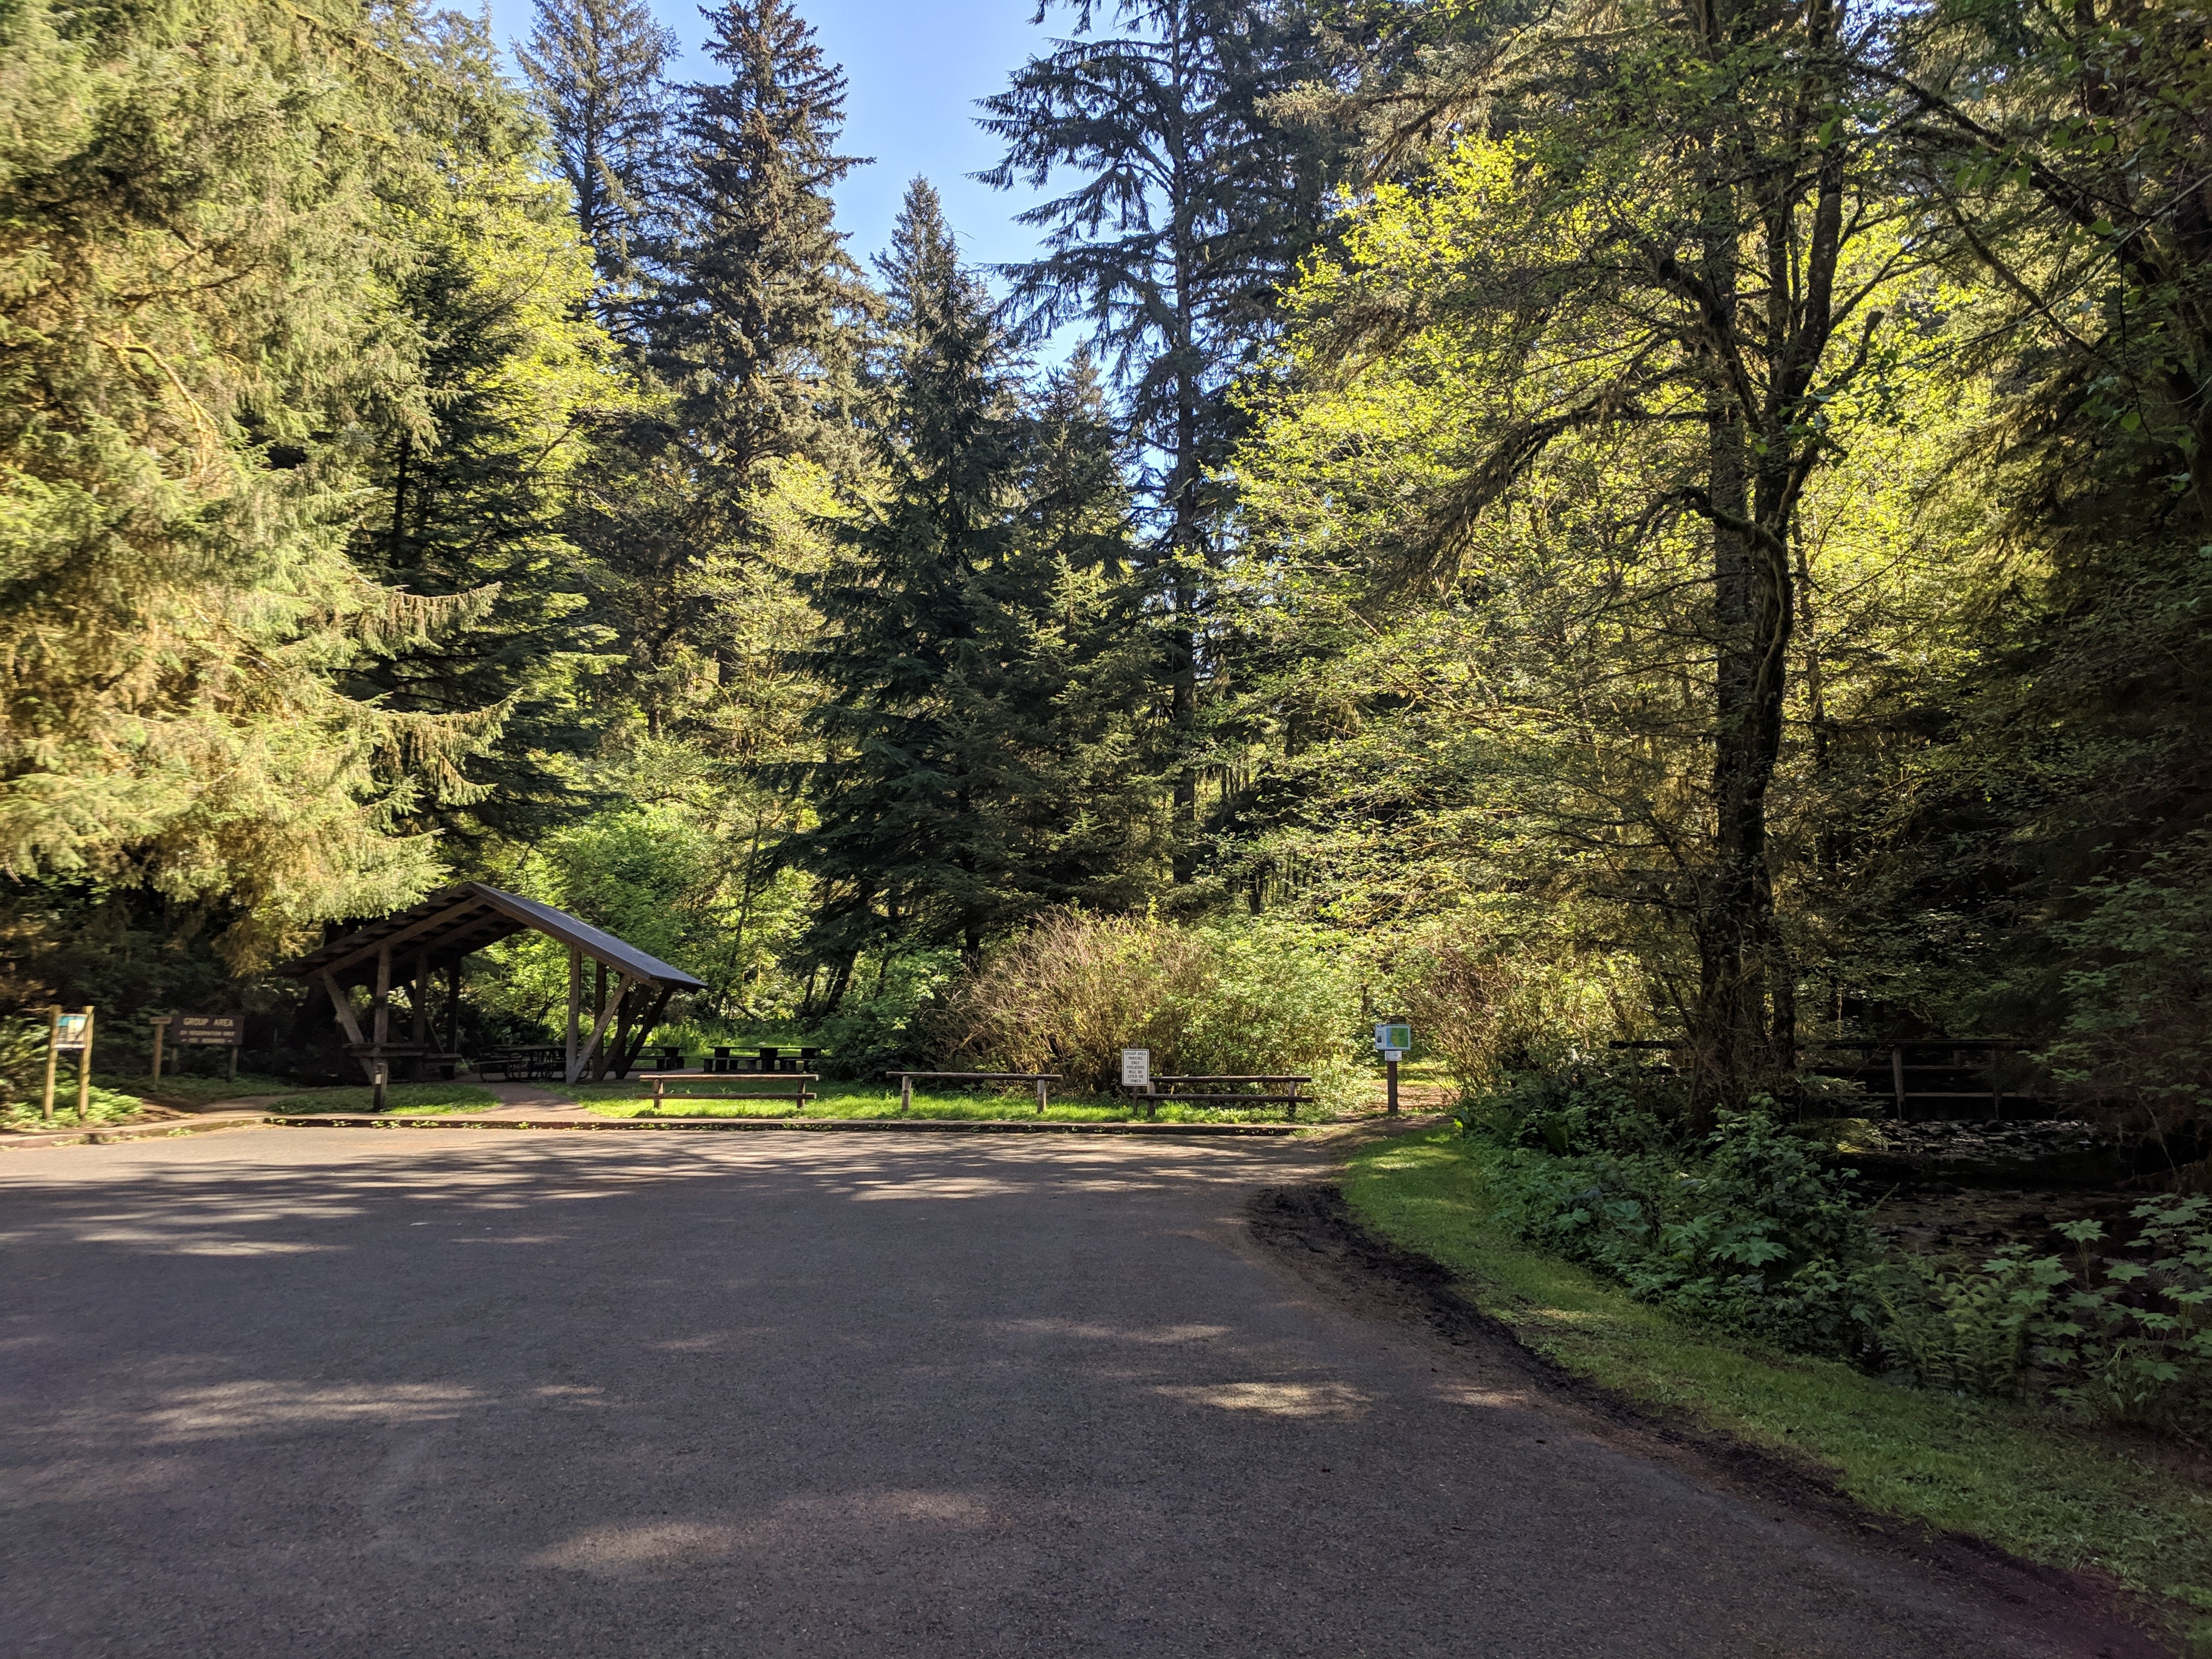 Parking for the group pavilion and camping area at Cape Perpetua